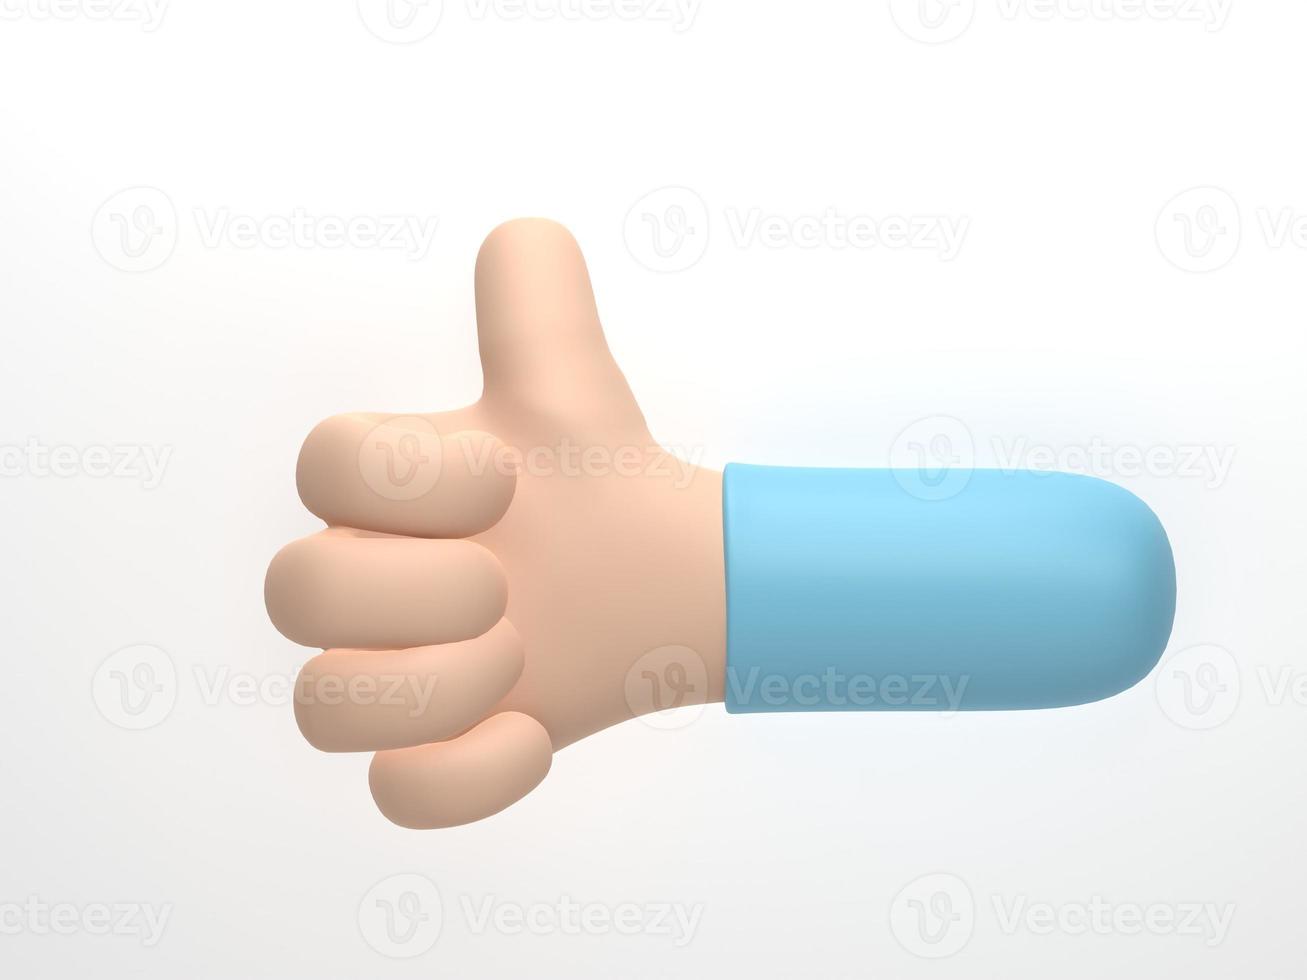 3D rendering, 3D illustration. Cartoon character hand shows thumb up, like gesture isolated on white background photo